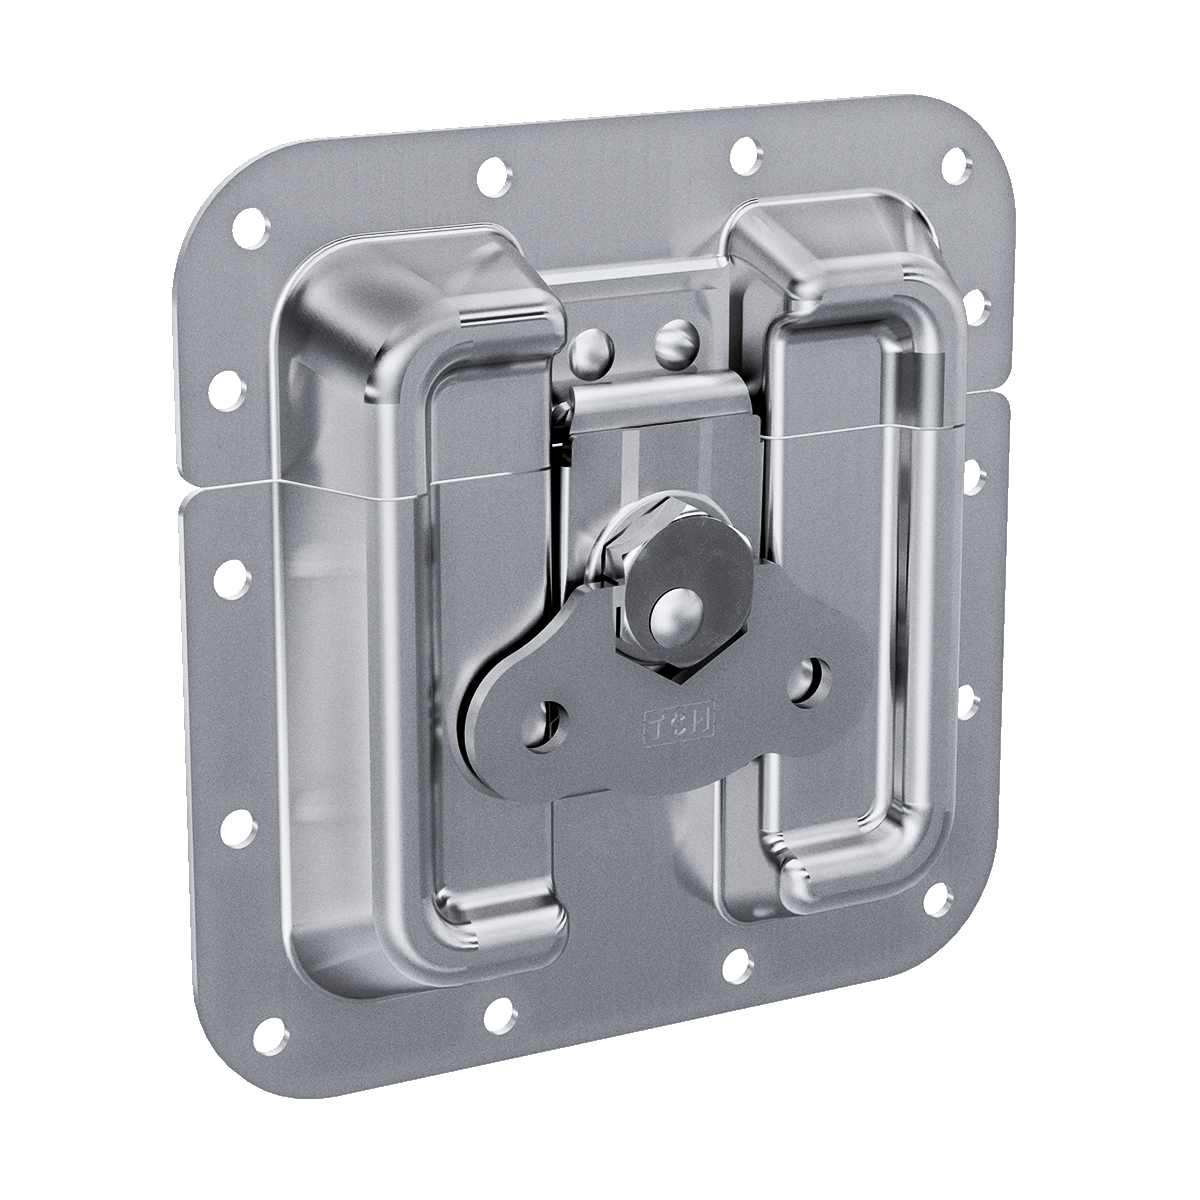 Stainless steel protected surface mount latch, perspective view